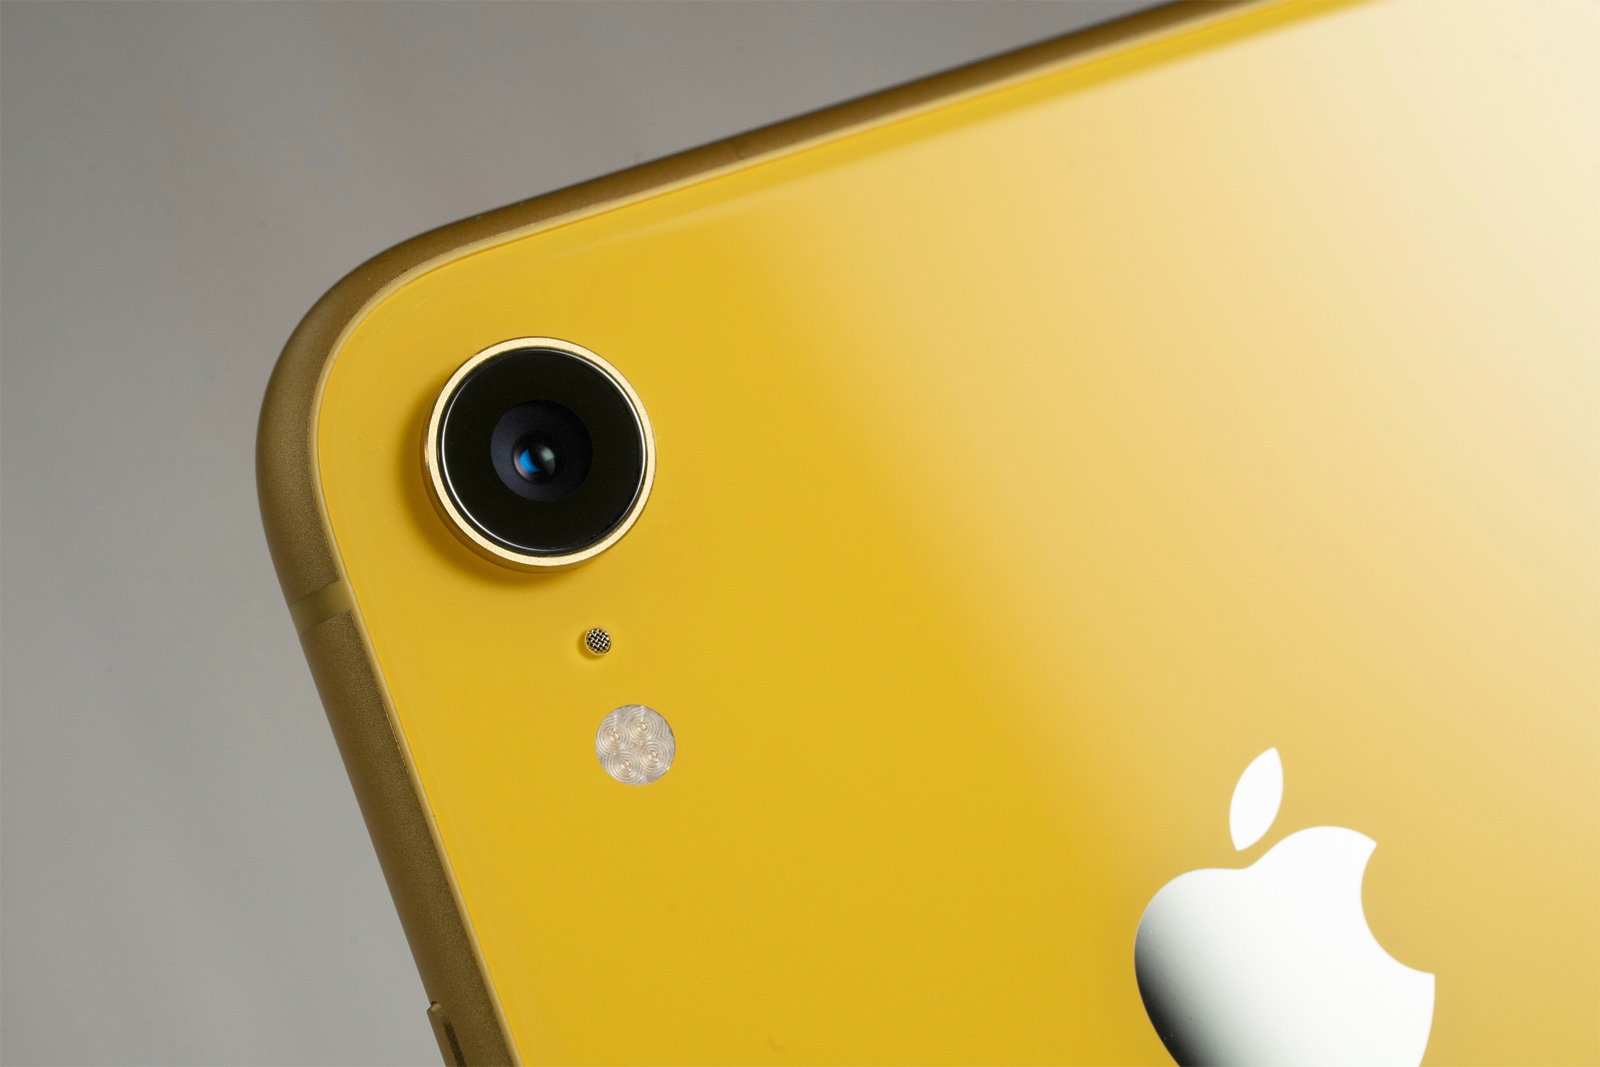 iPhone XR may take portrait photos of non-humans through an app | DeviceDaily.com